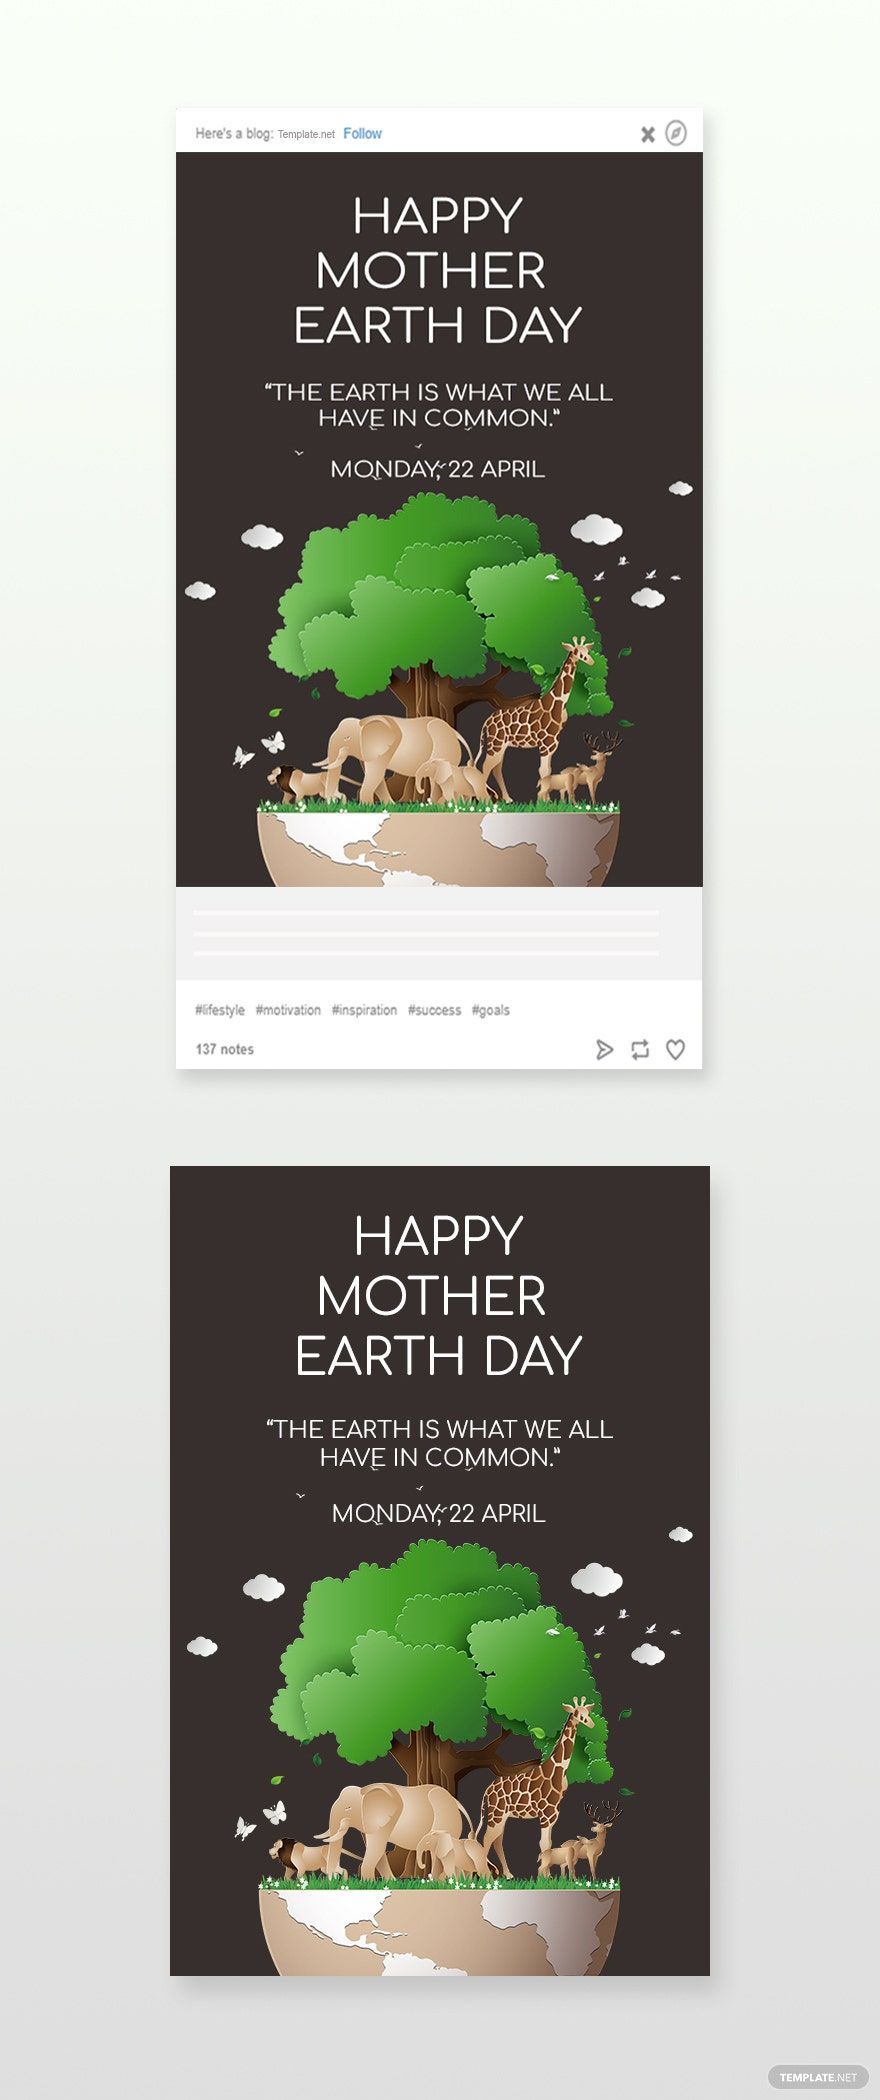 Free Tumblr Earth Day Template in PSD